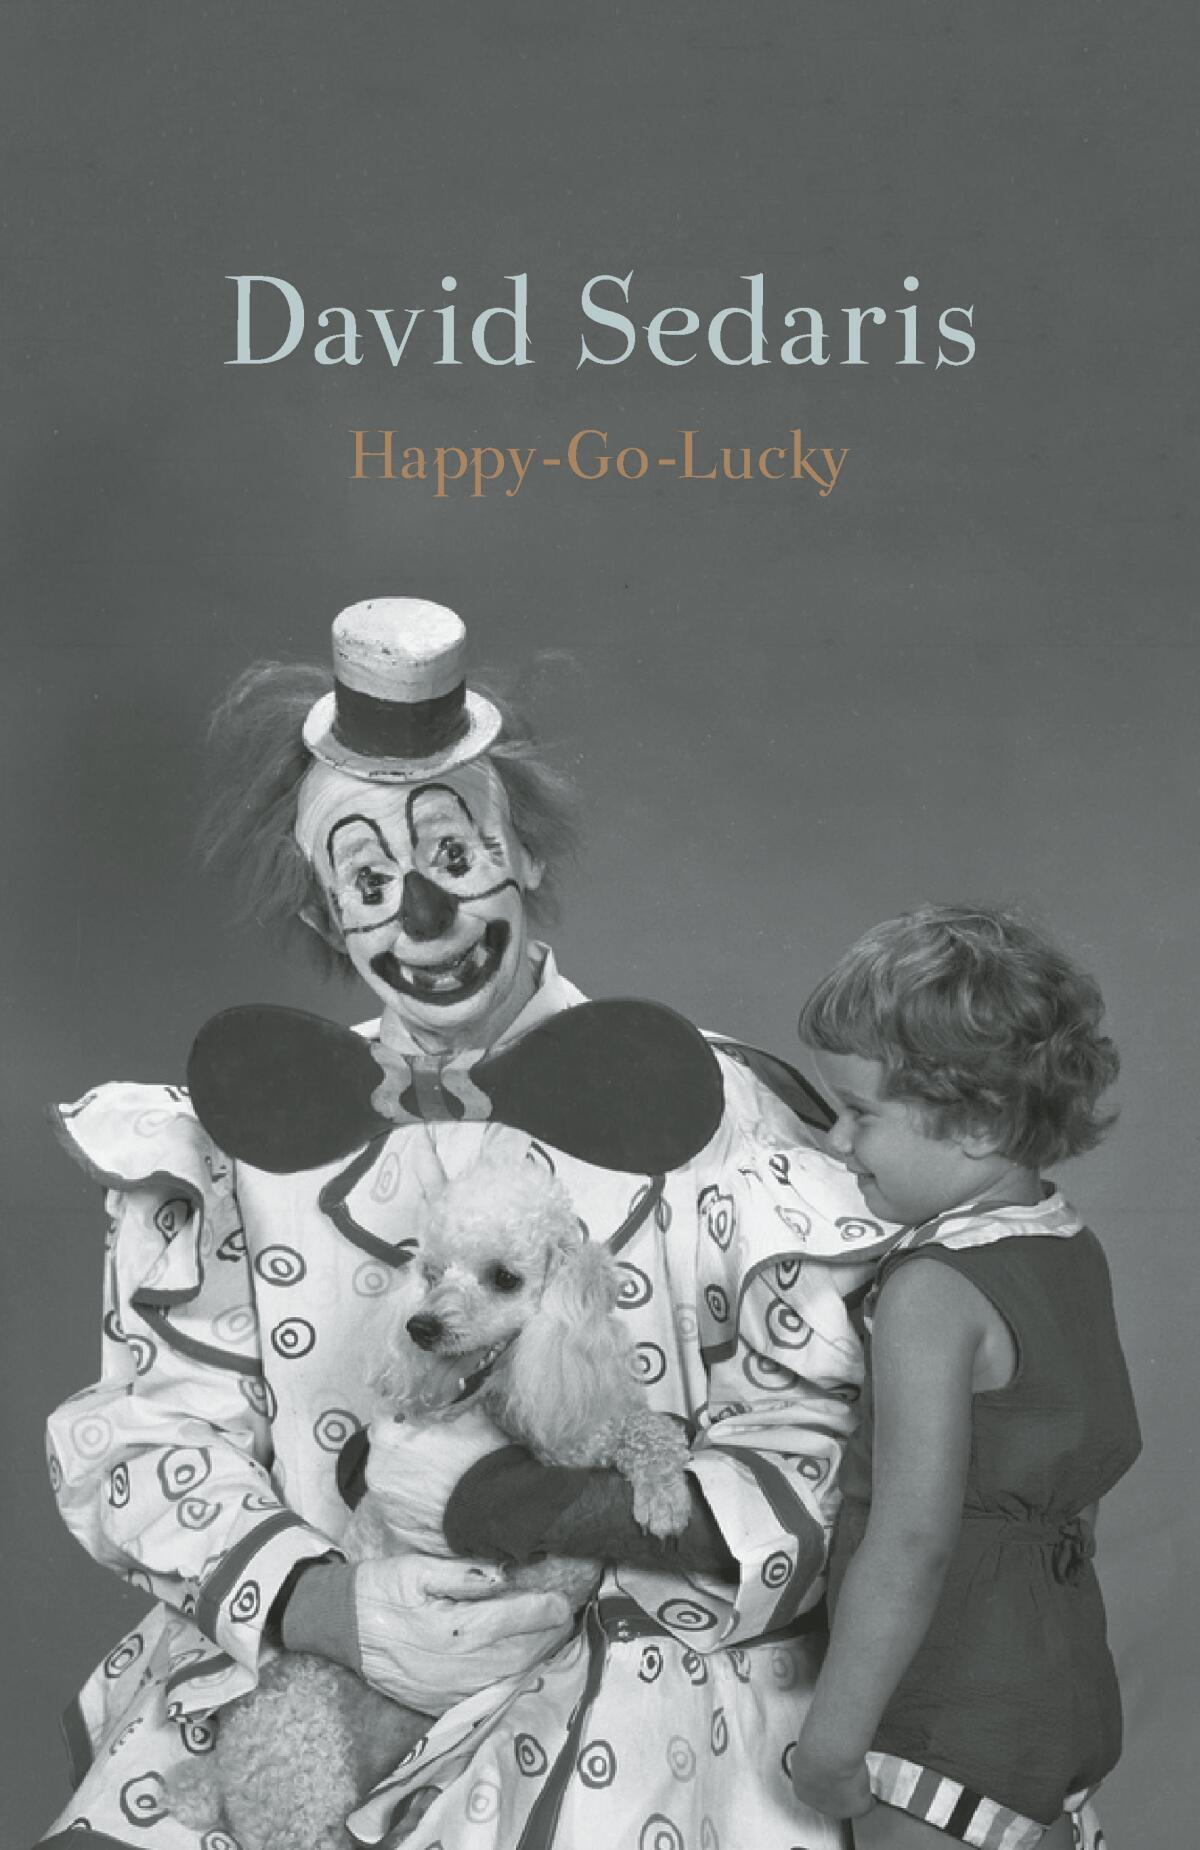 A clown holding a poodle sits next to a little girl on the cover of "Happy-Go-Lucky" by David Sedaris